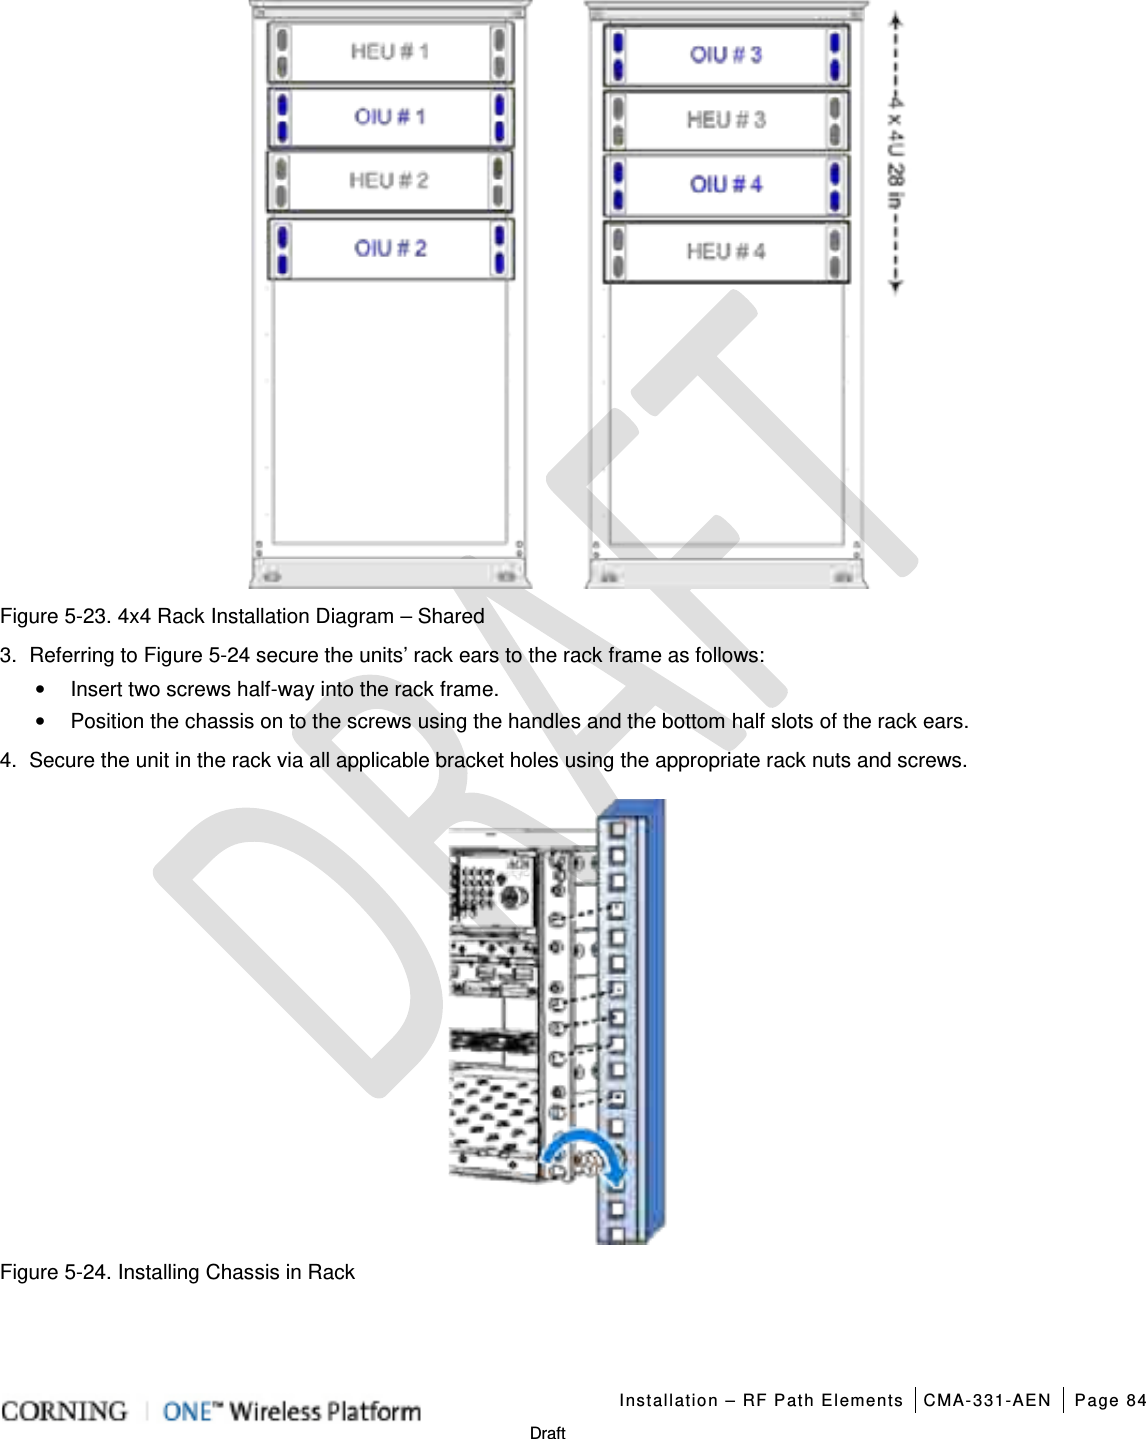   Installation – RF Path Elements CMA-331-AEN Page 84   Draft  Figure  5-23. 4x4 Rack Installation Diagram – Shared 3.  Referring to Figure  5-24 secure the units’ rack ears to the rack frame as follows: • Insert two screws half-way into the rack frame.   • Position the chassis on to the screws using the handles and the bottom half slots of the rack ears. 4.  Secure the unit in the rack via all applicable bracket holes using the appropriate rack nuts and screws.    Figure  5-24. Installing Chassis in Rack 